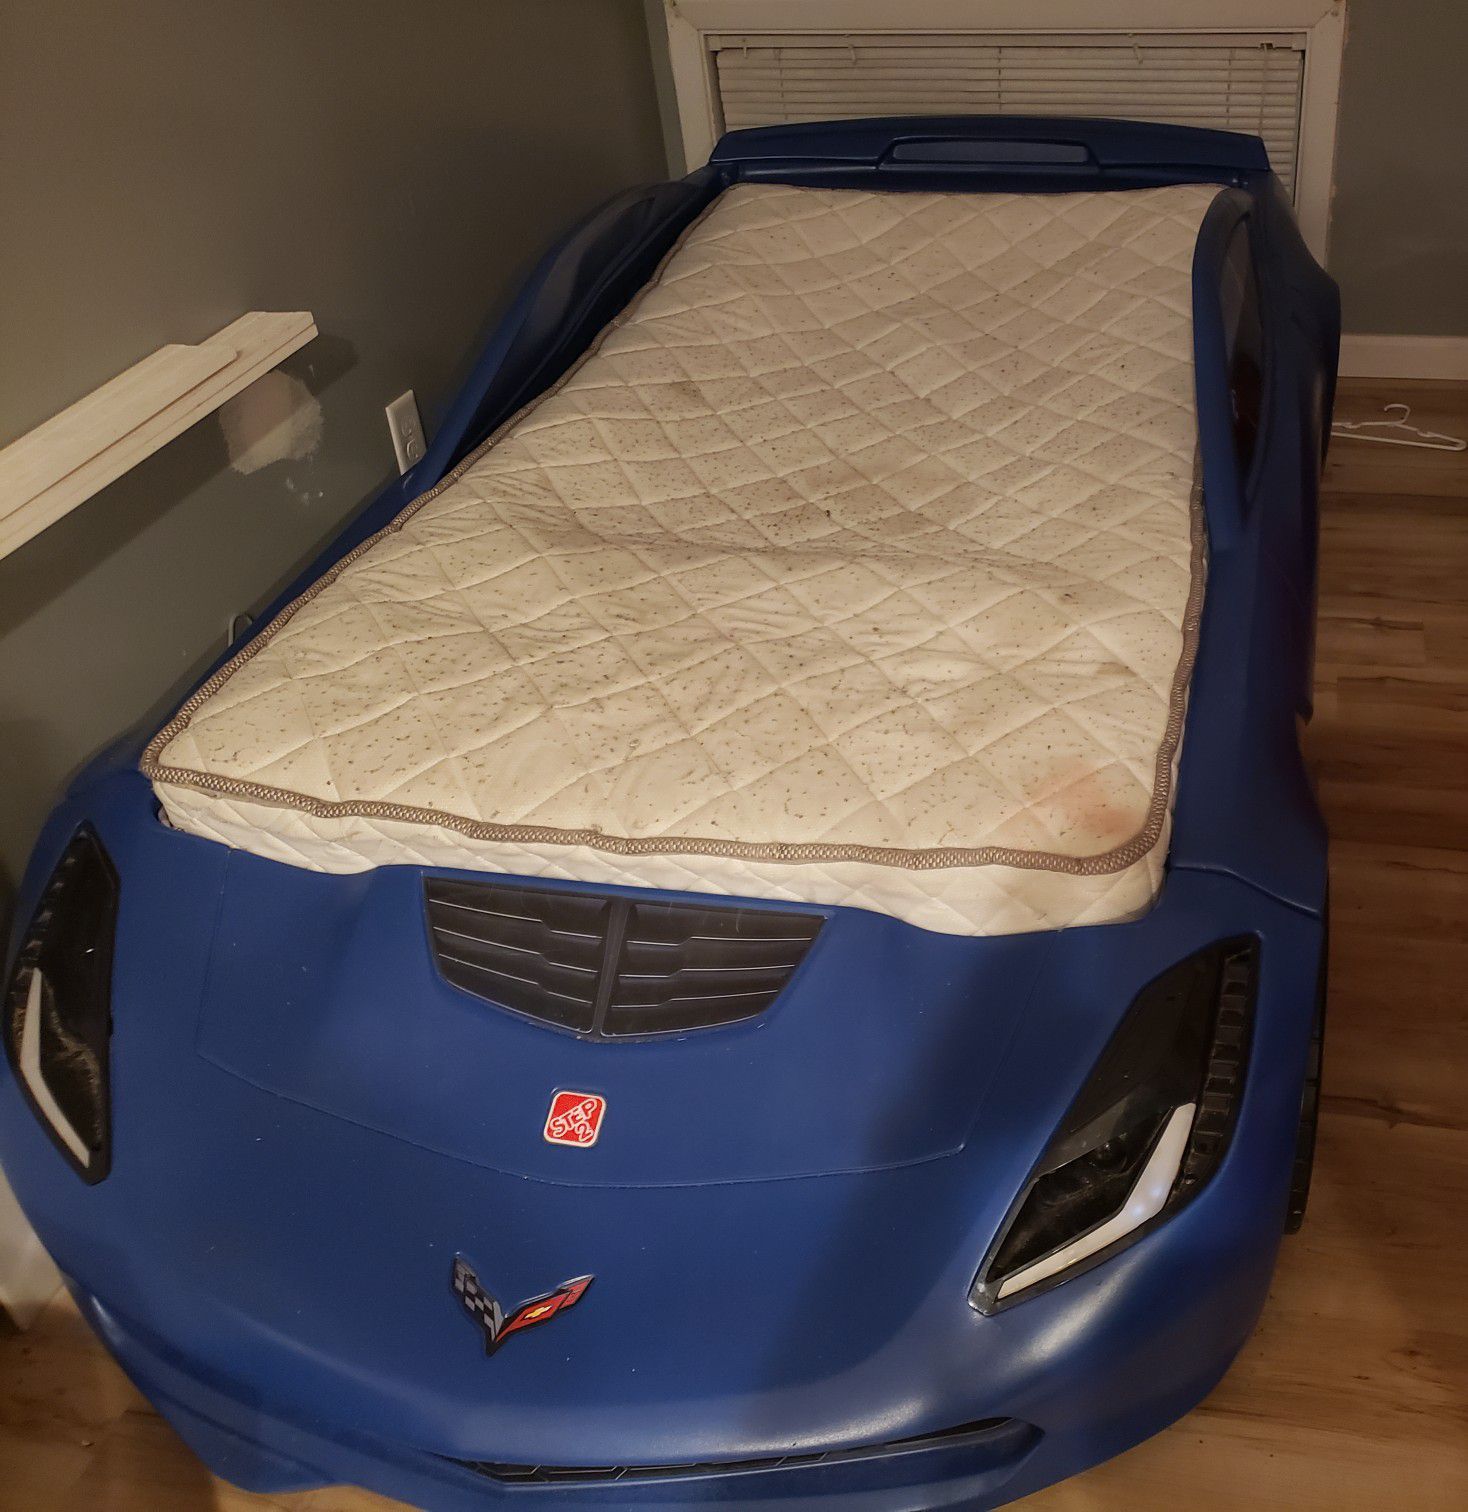 2 twin race car bed with flashing lights